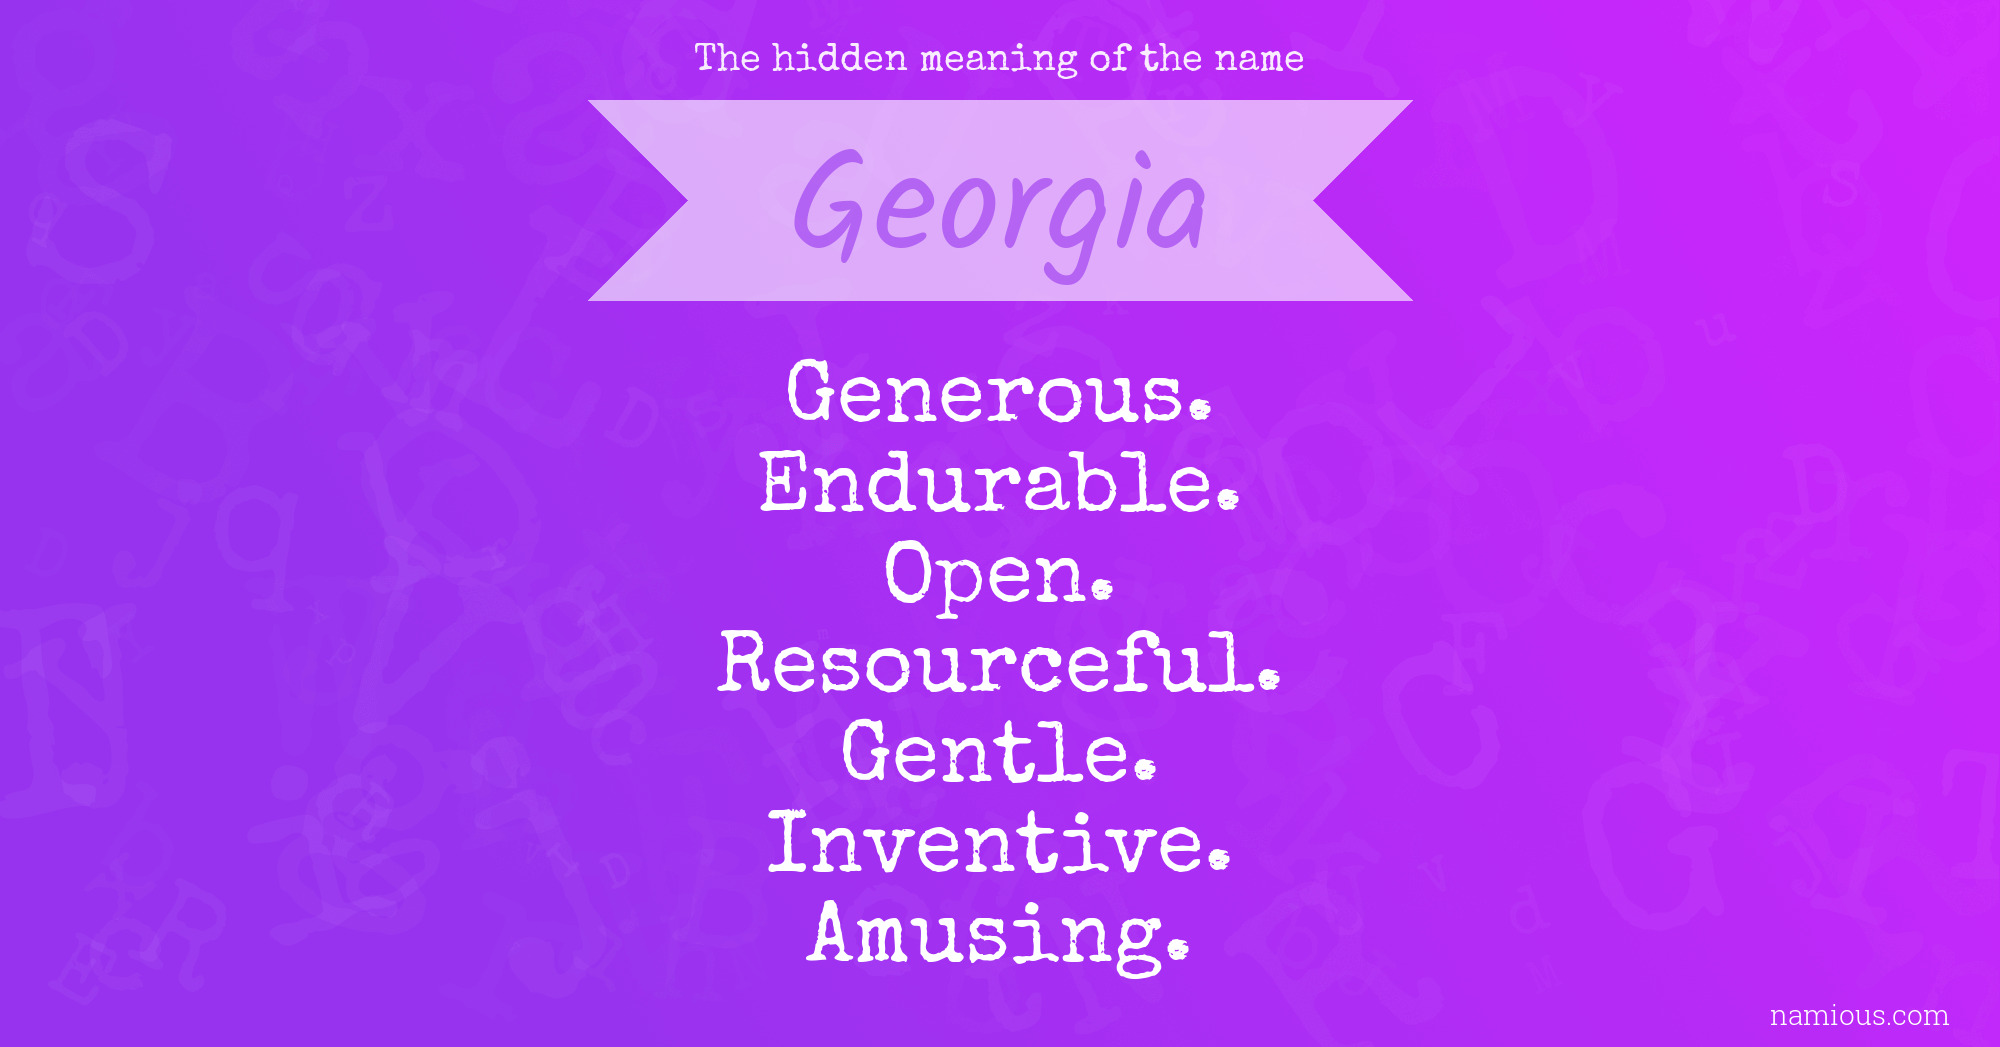 The hidden meaning of the name Georgia